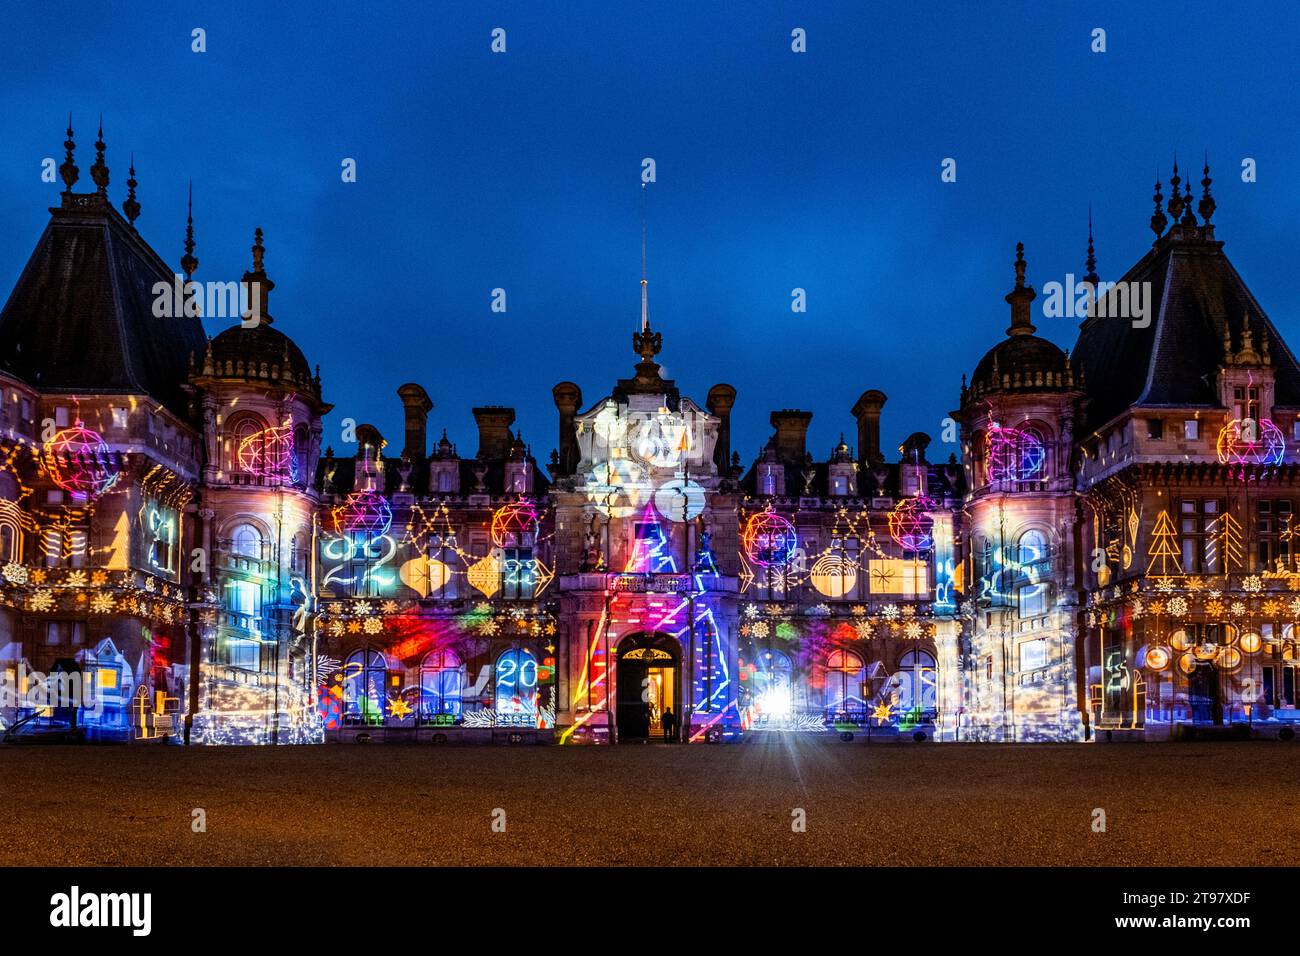 The manor at Waddesdon illuminated with winter lights for Christmas. Stock Photo